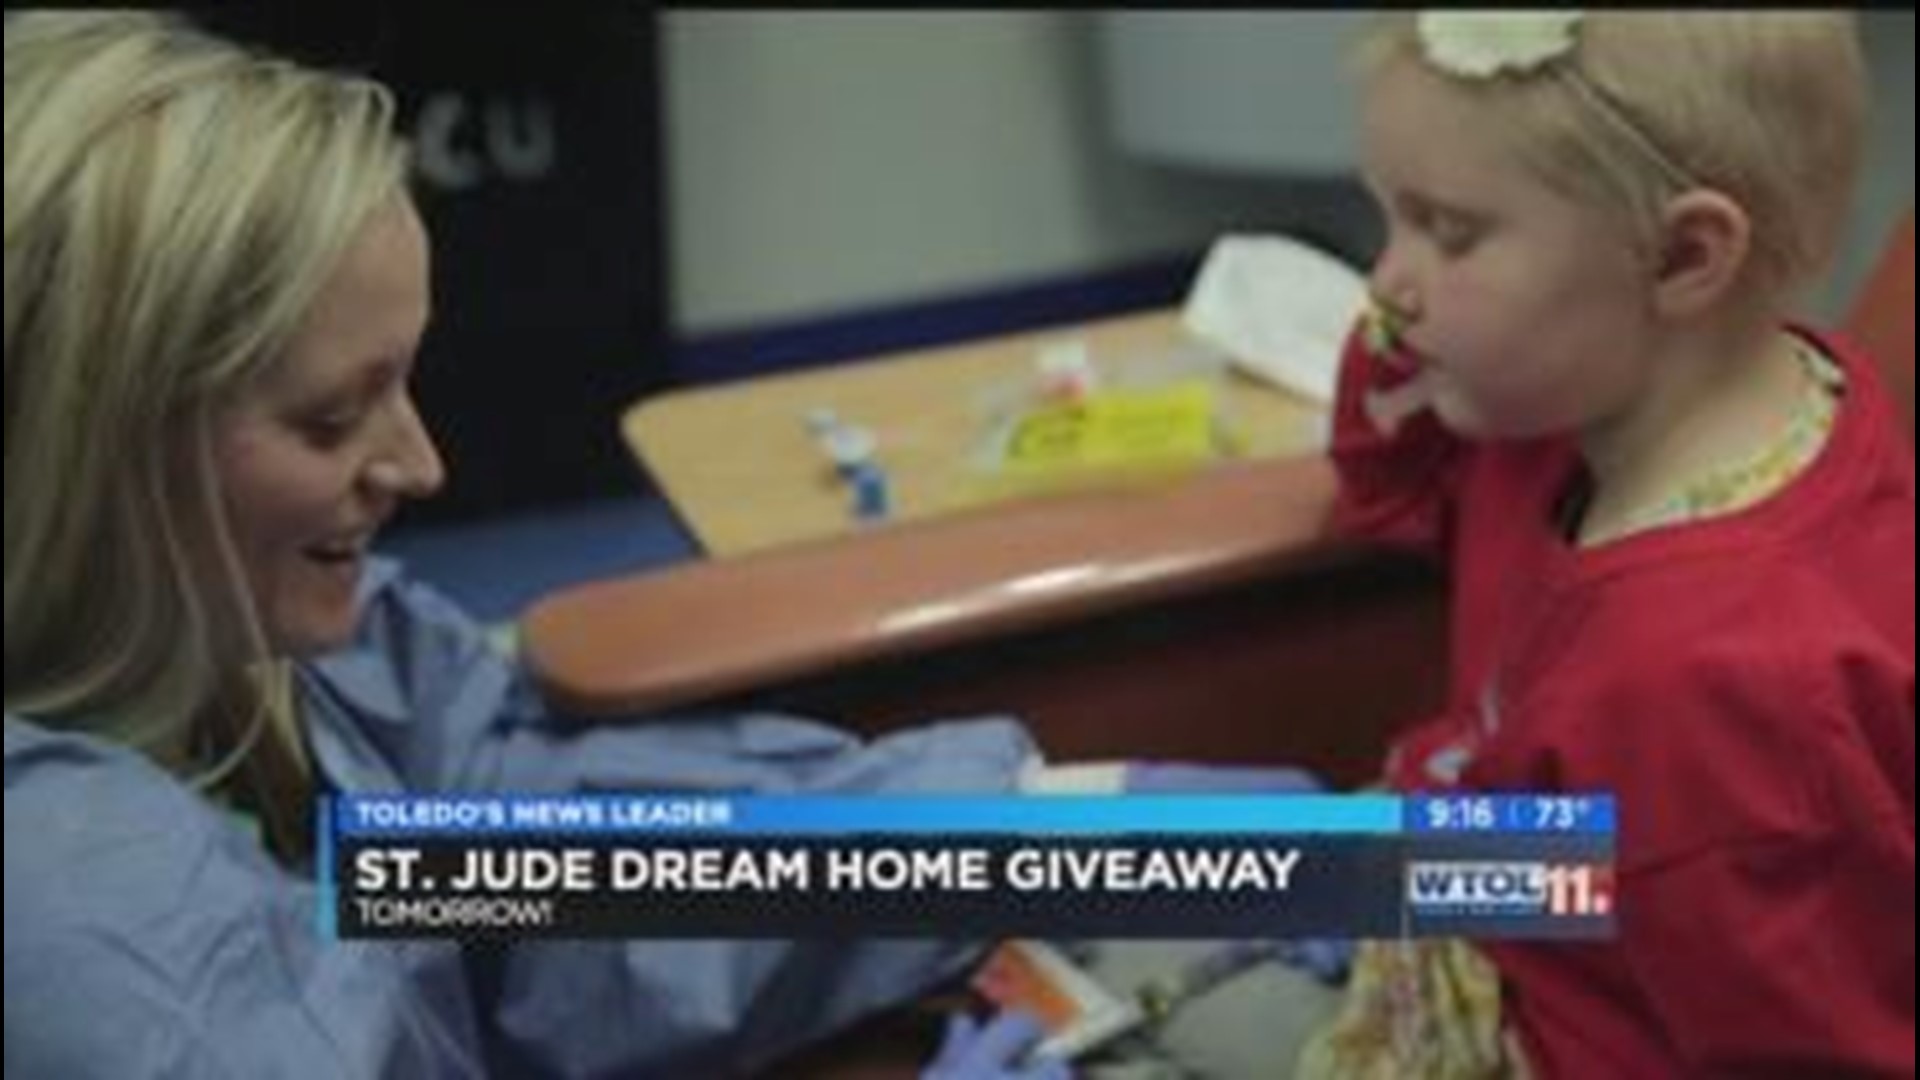 Get in on the St. Jude Dream Home Giveaway on WTOL 11 Your Day